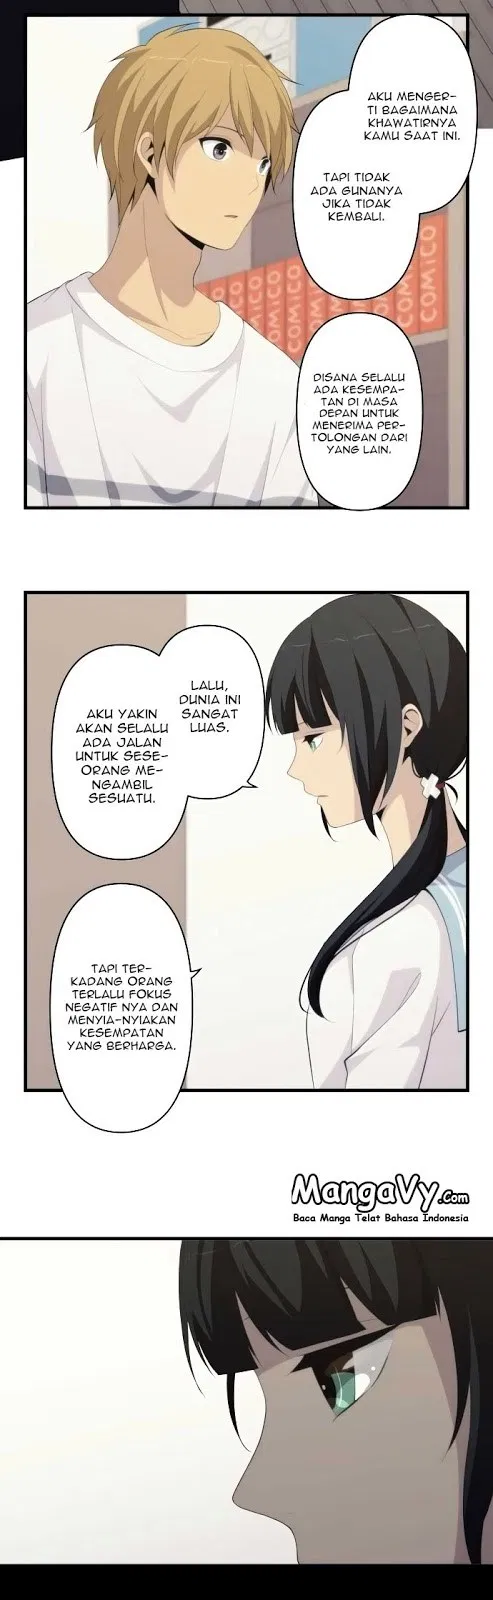 ReLIFE Chapter 171